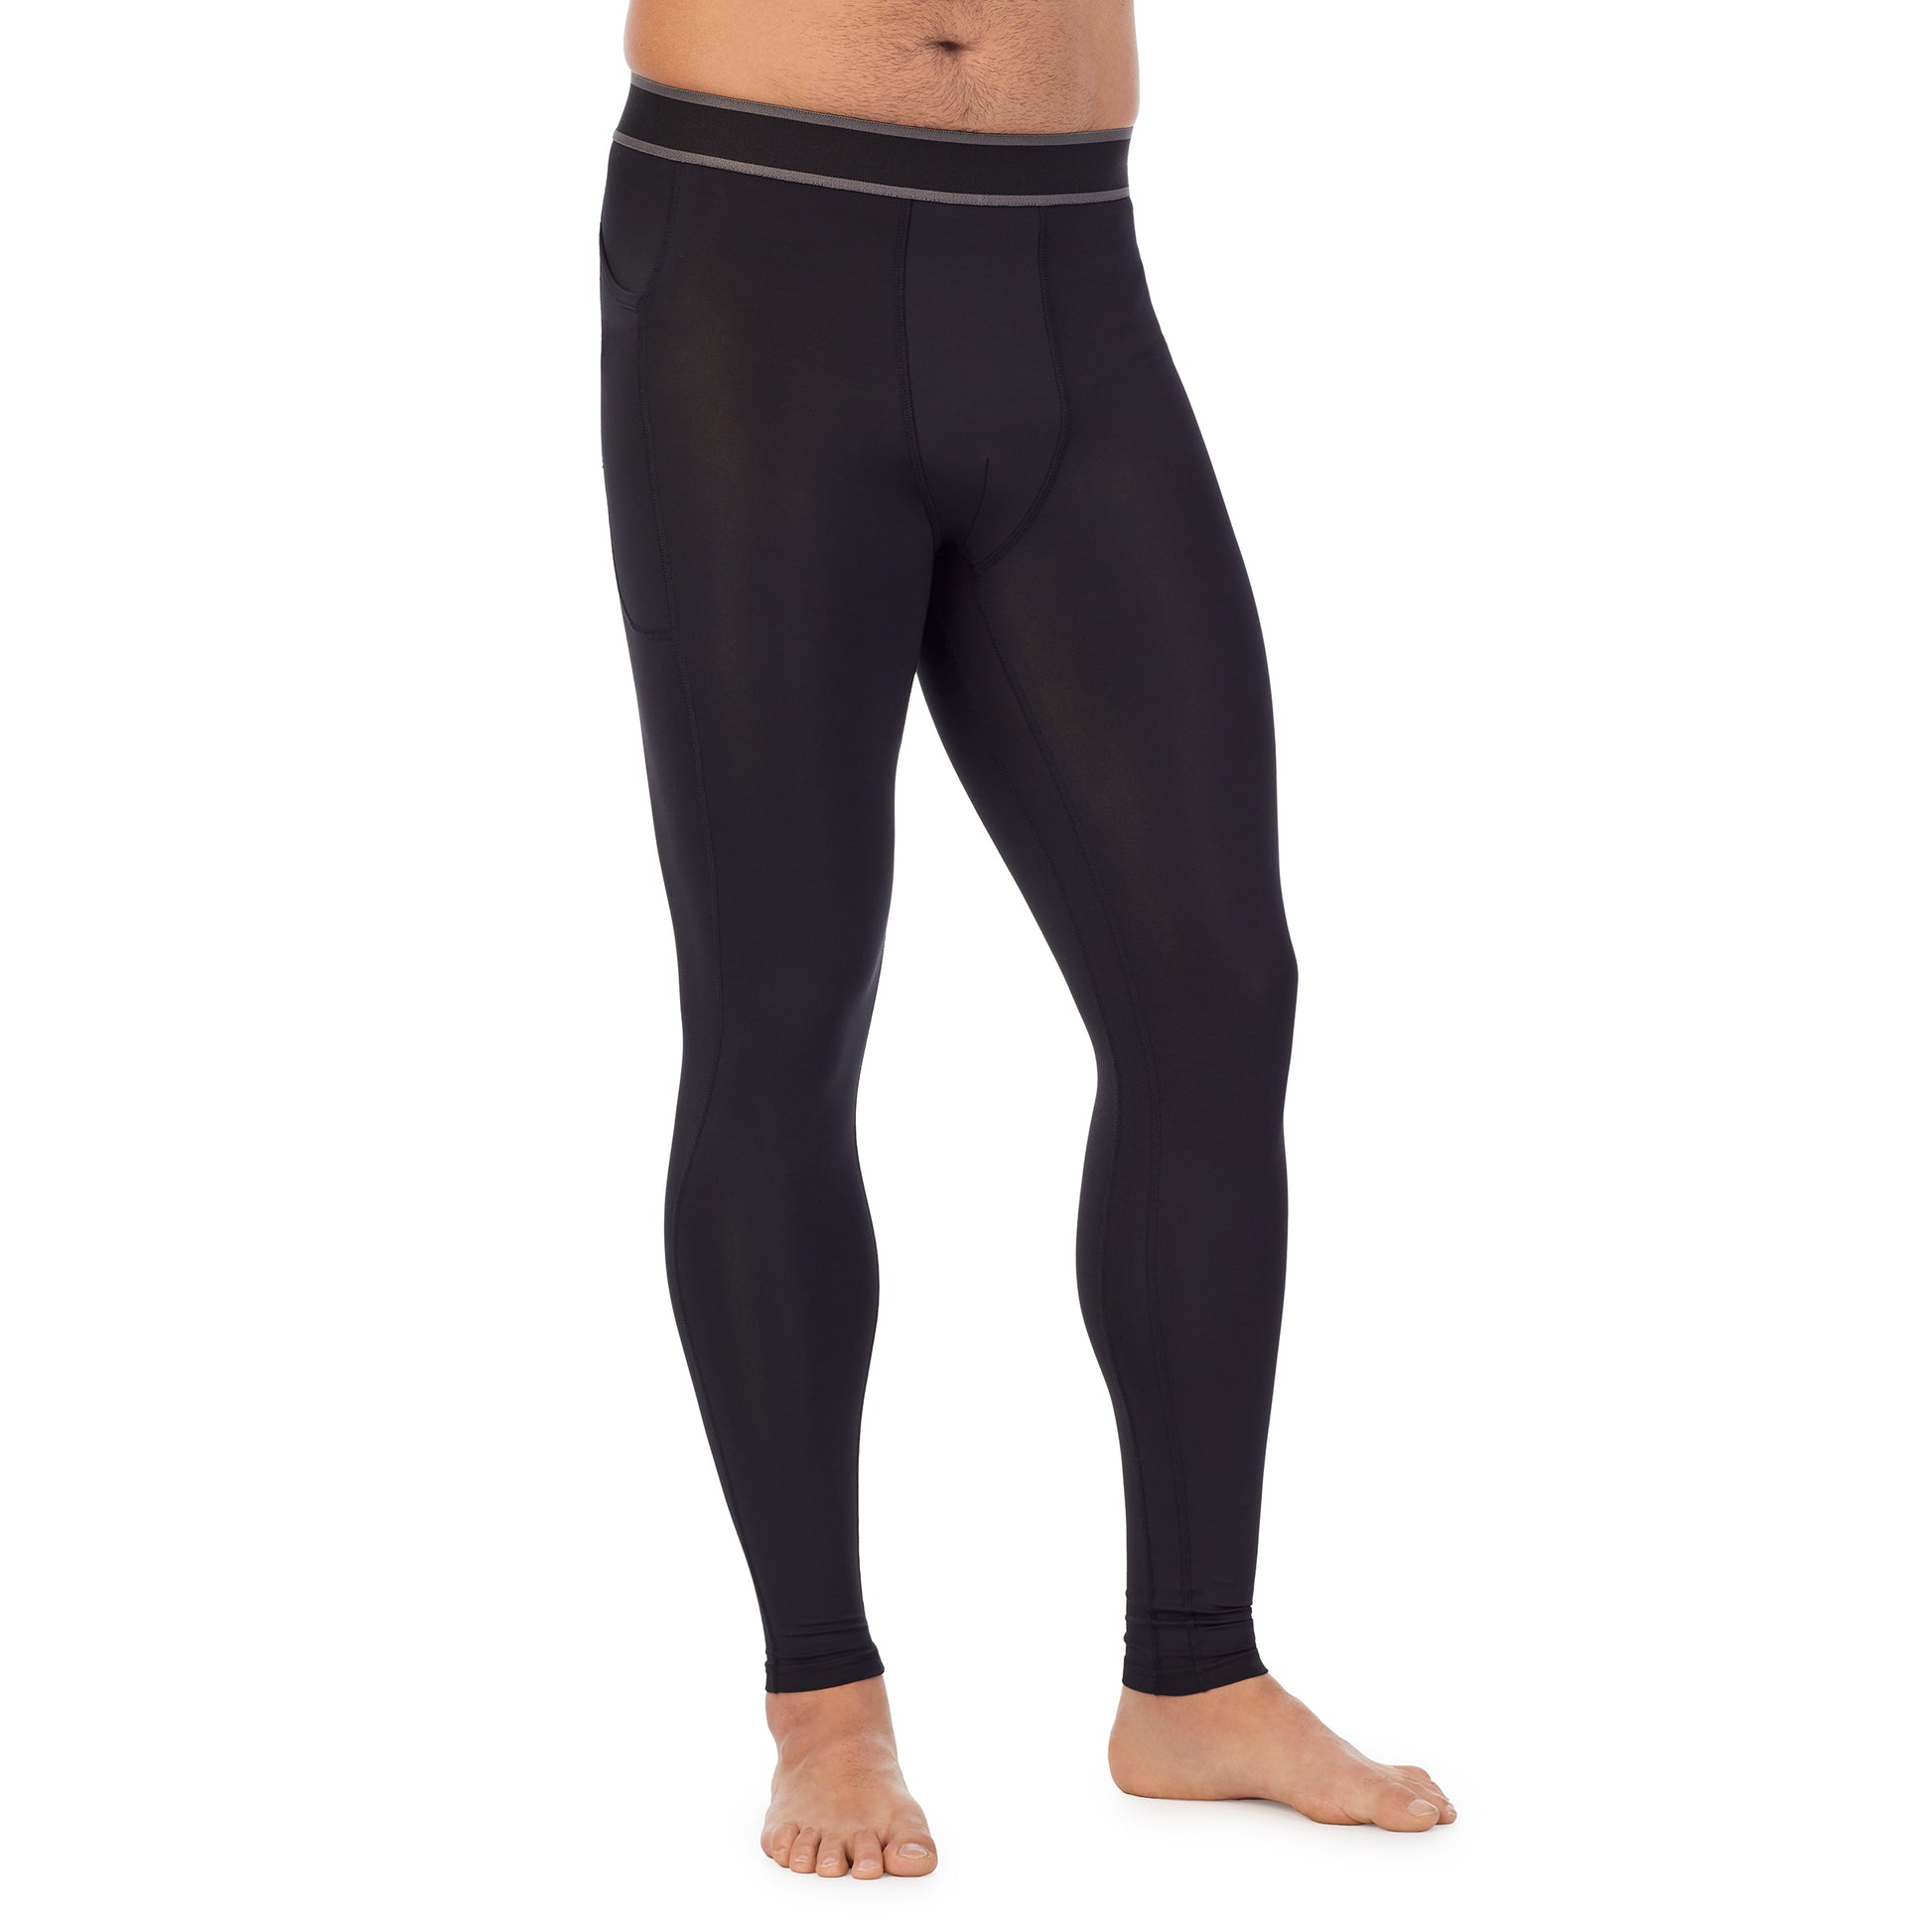 Black;Model is wearing size M. He is 6'2", Waist 32", Inseam 34".@A man wearing black lite compression pant.